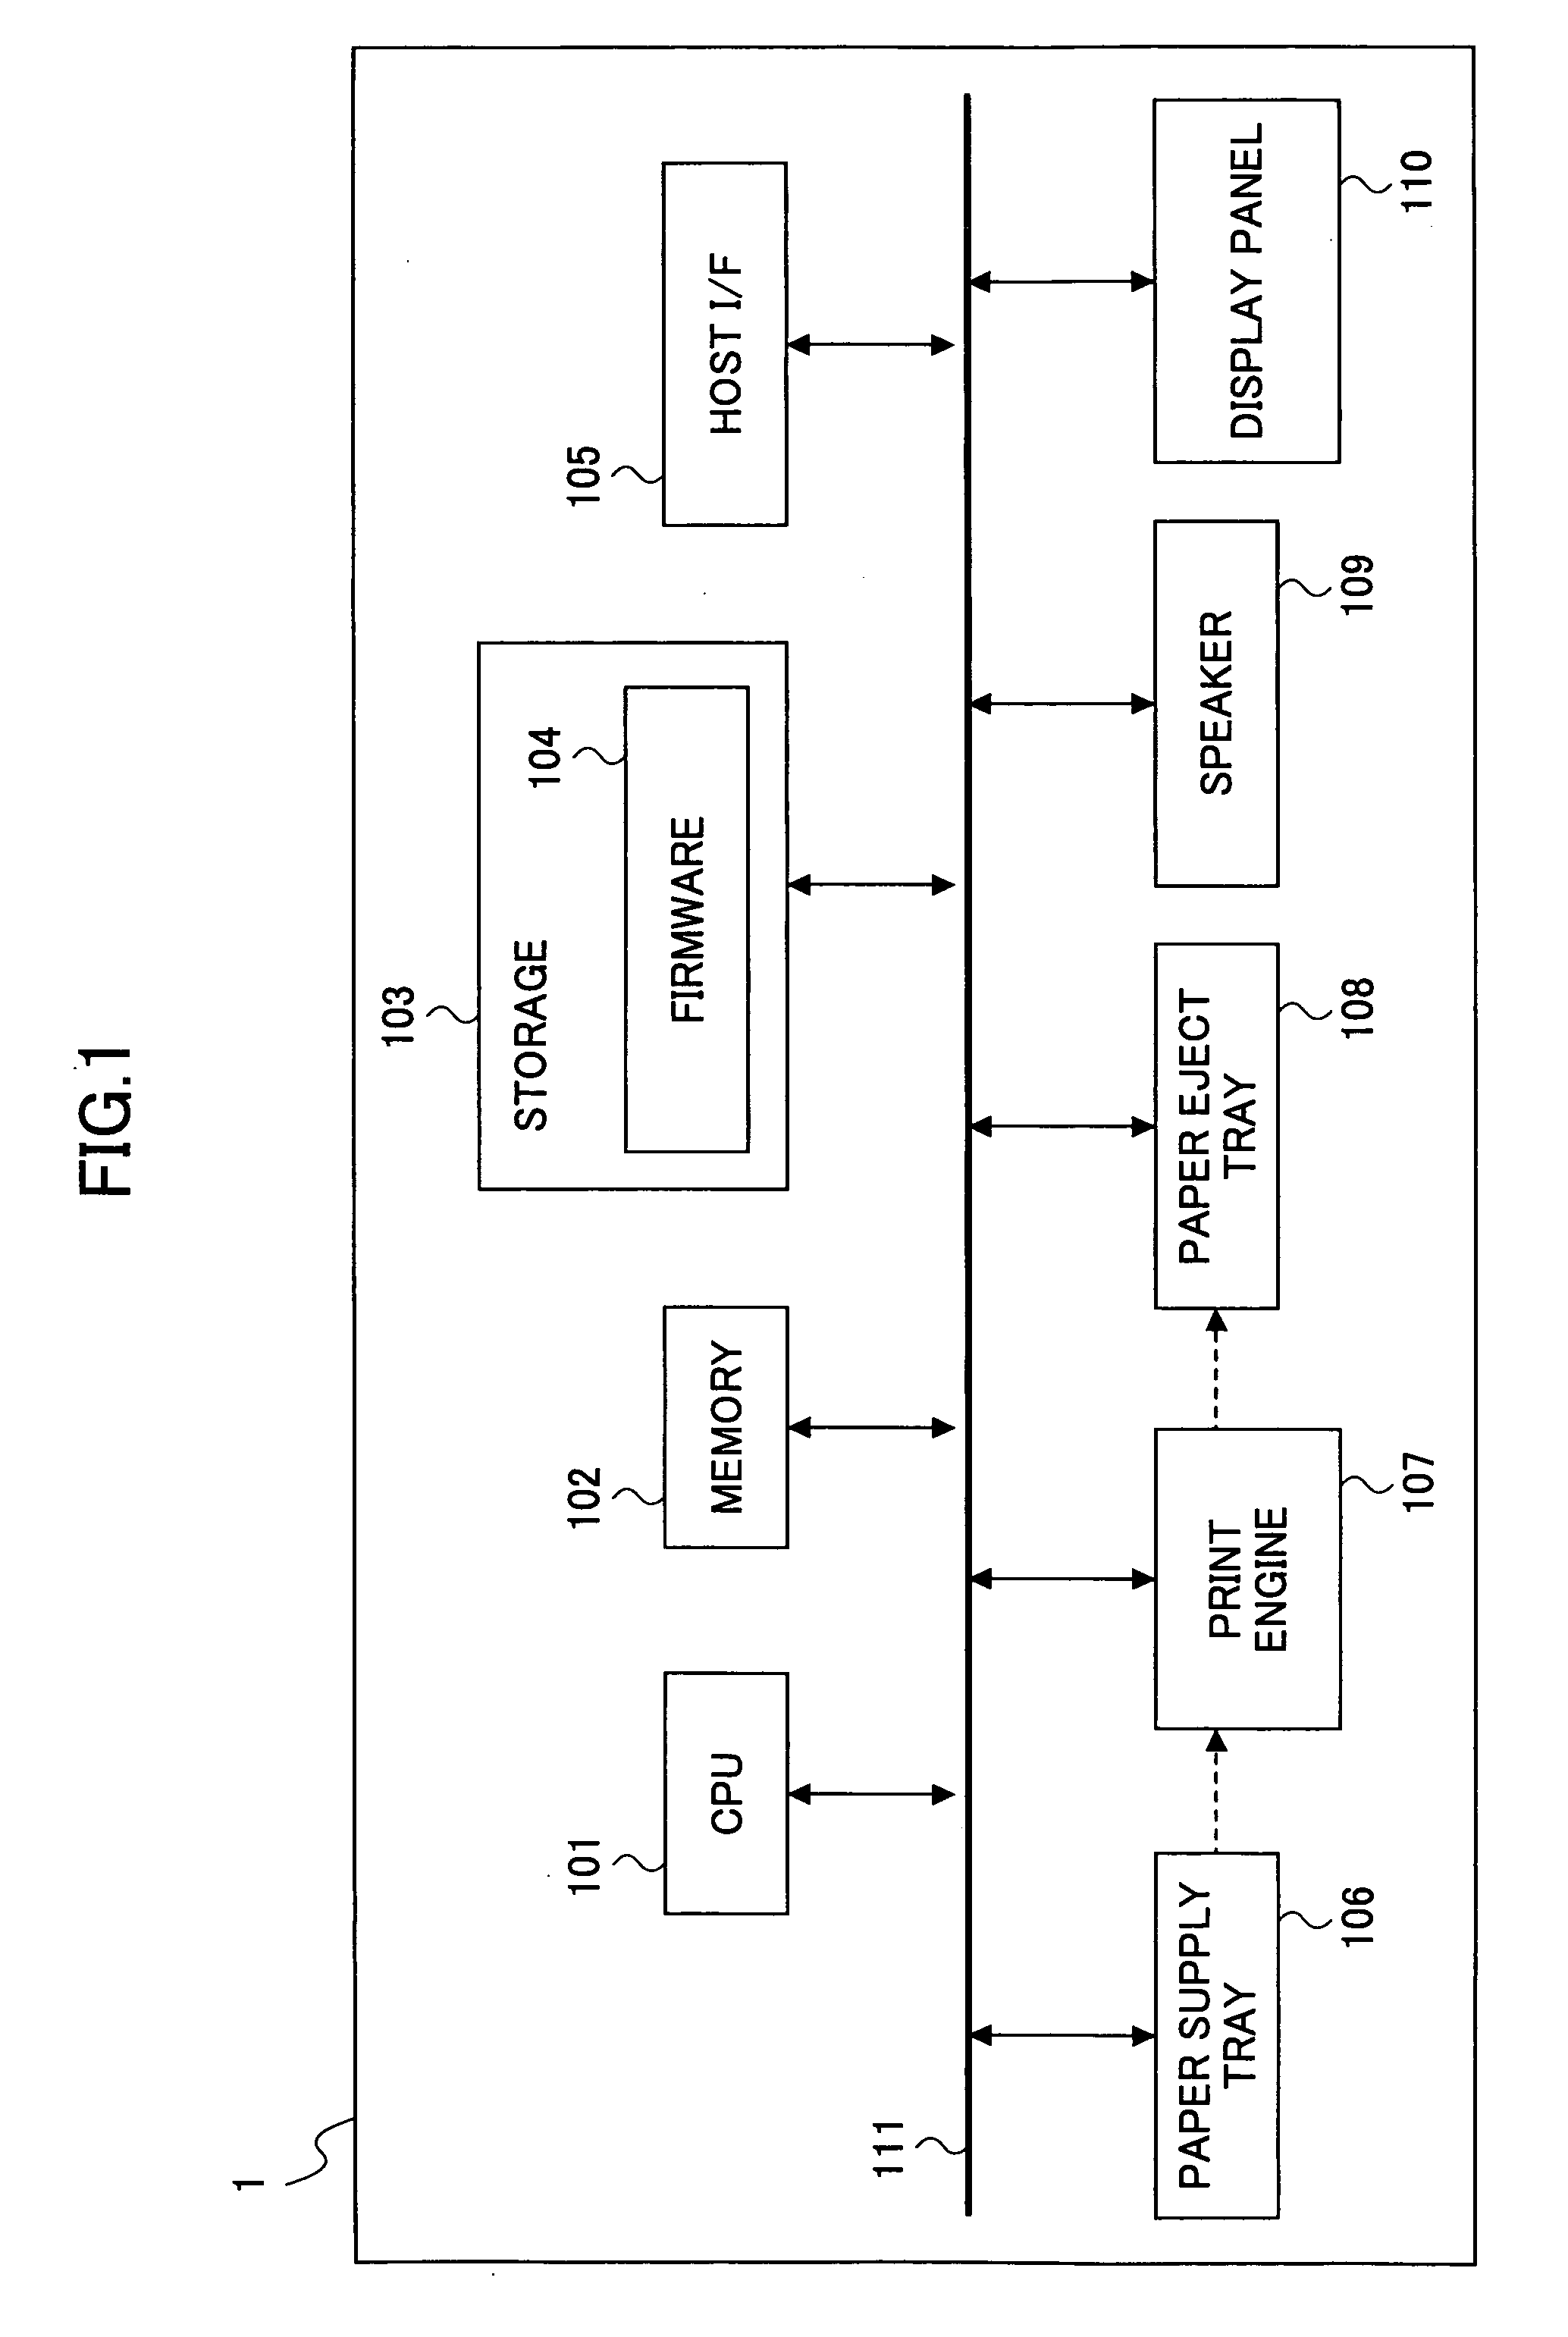 Image forming apparatus having an image forming part that can be set in a standby state in response to image forming operation to be performed subsequently